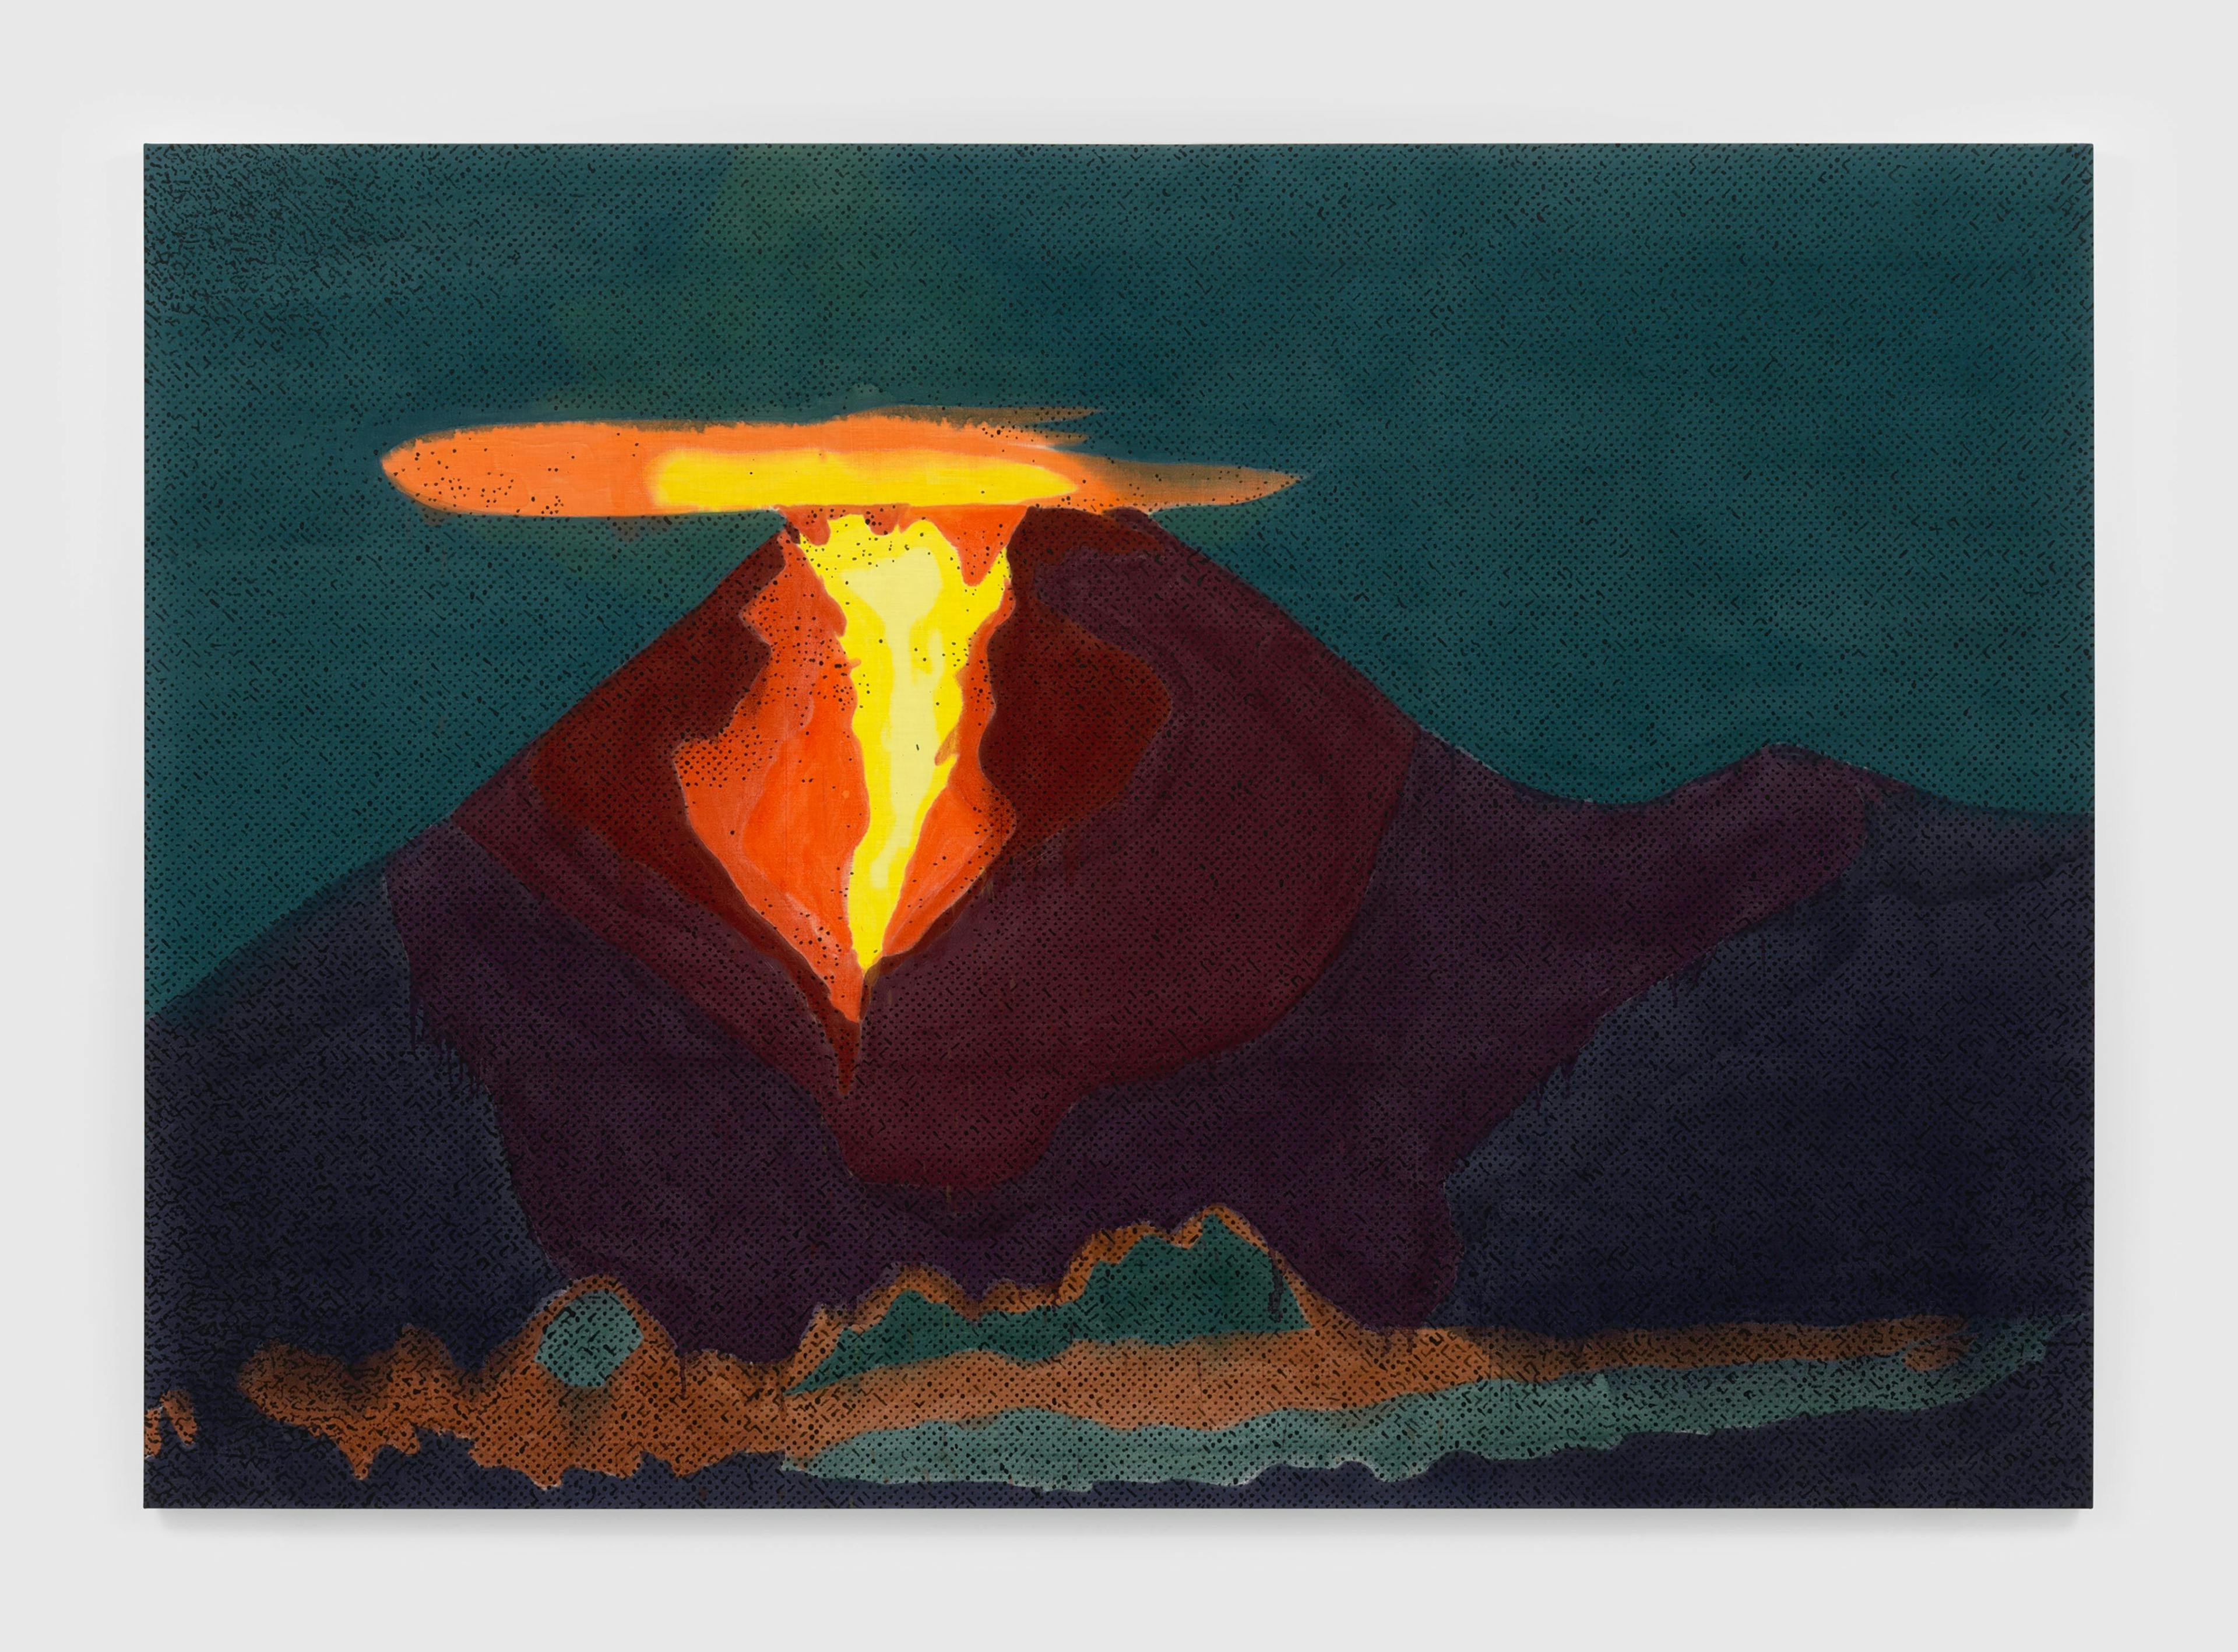 A painting by Nate Lowman, titled Stratovolcano (Merapi), dated 2021.